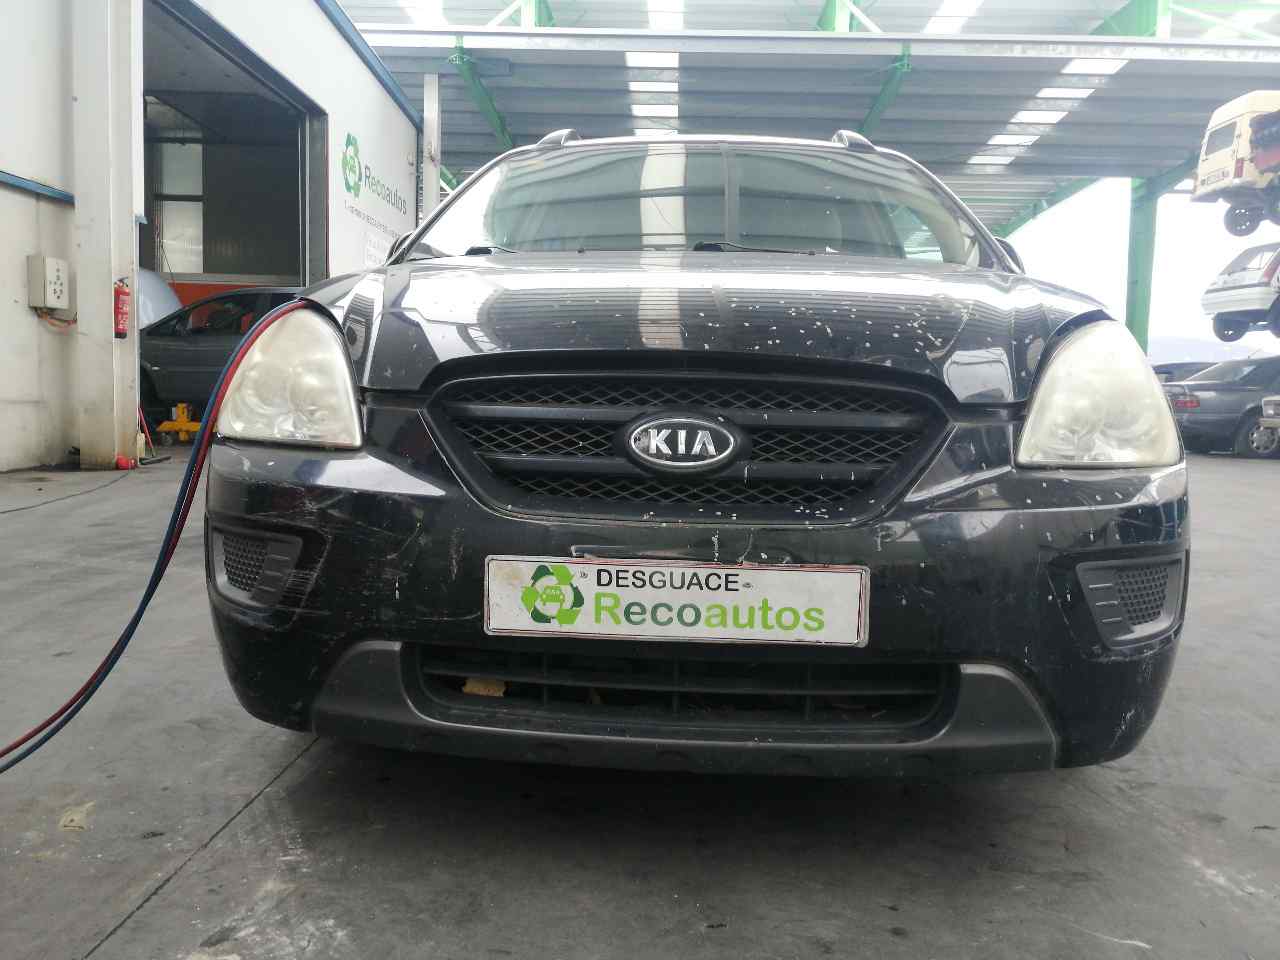 KIA Carens 3 generation (RP) (2013-2019) Other Control Units 3930027400, 9670930004, KEFICO 19860405